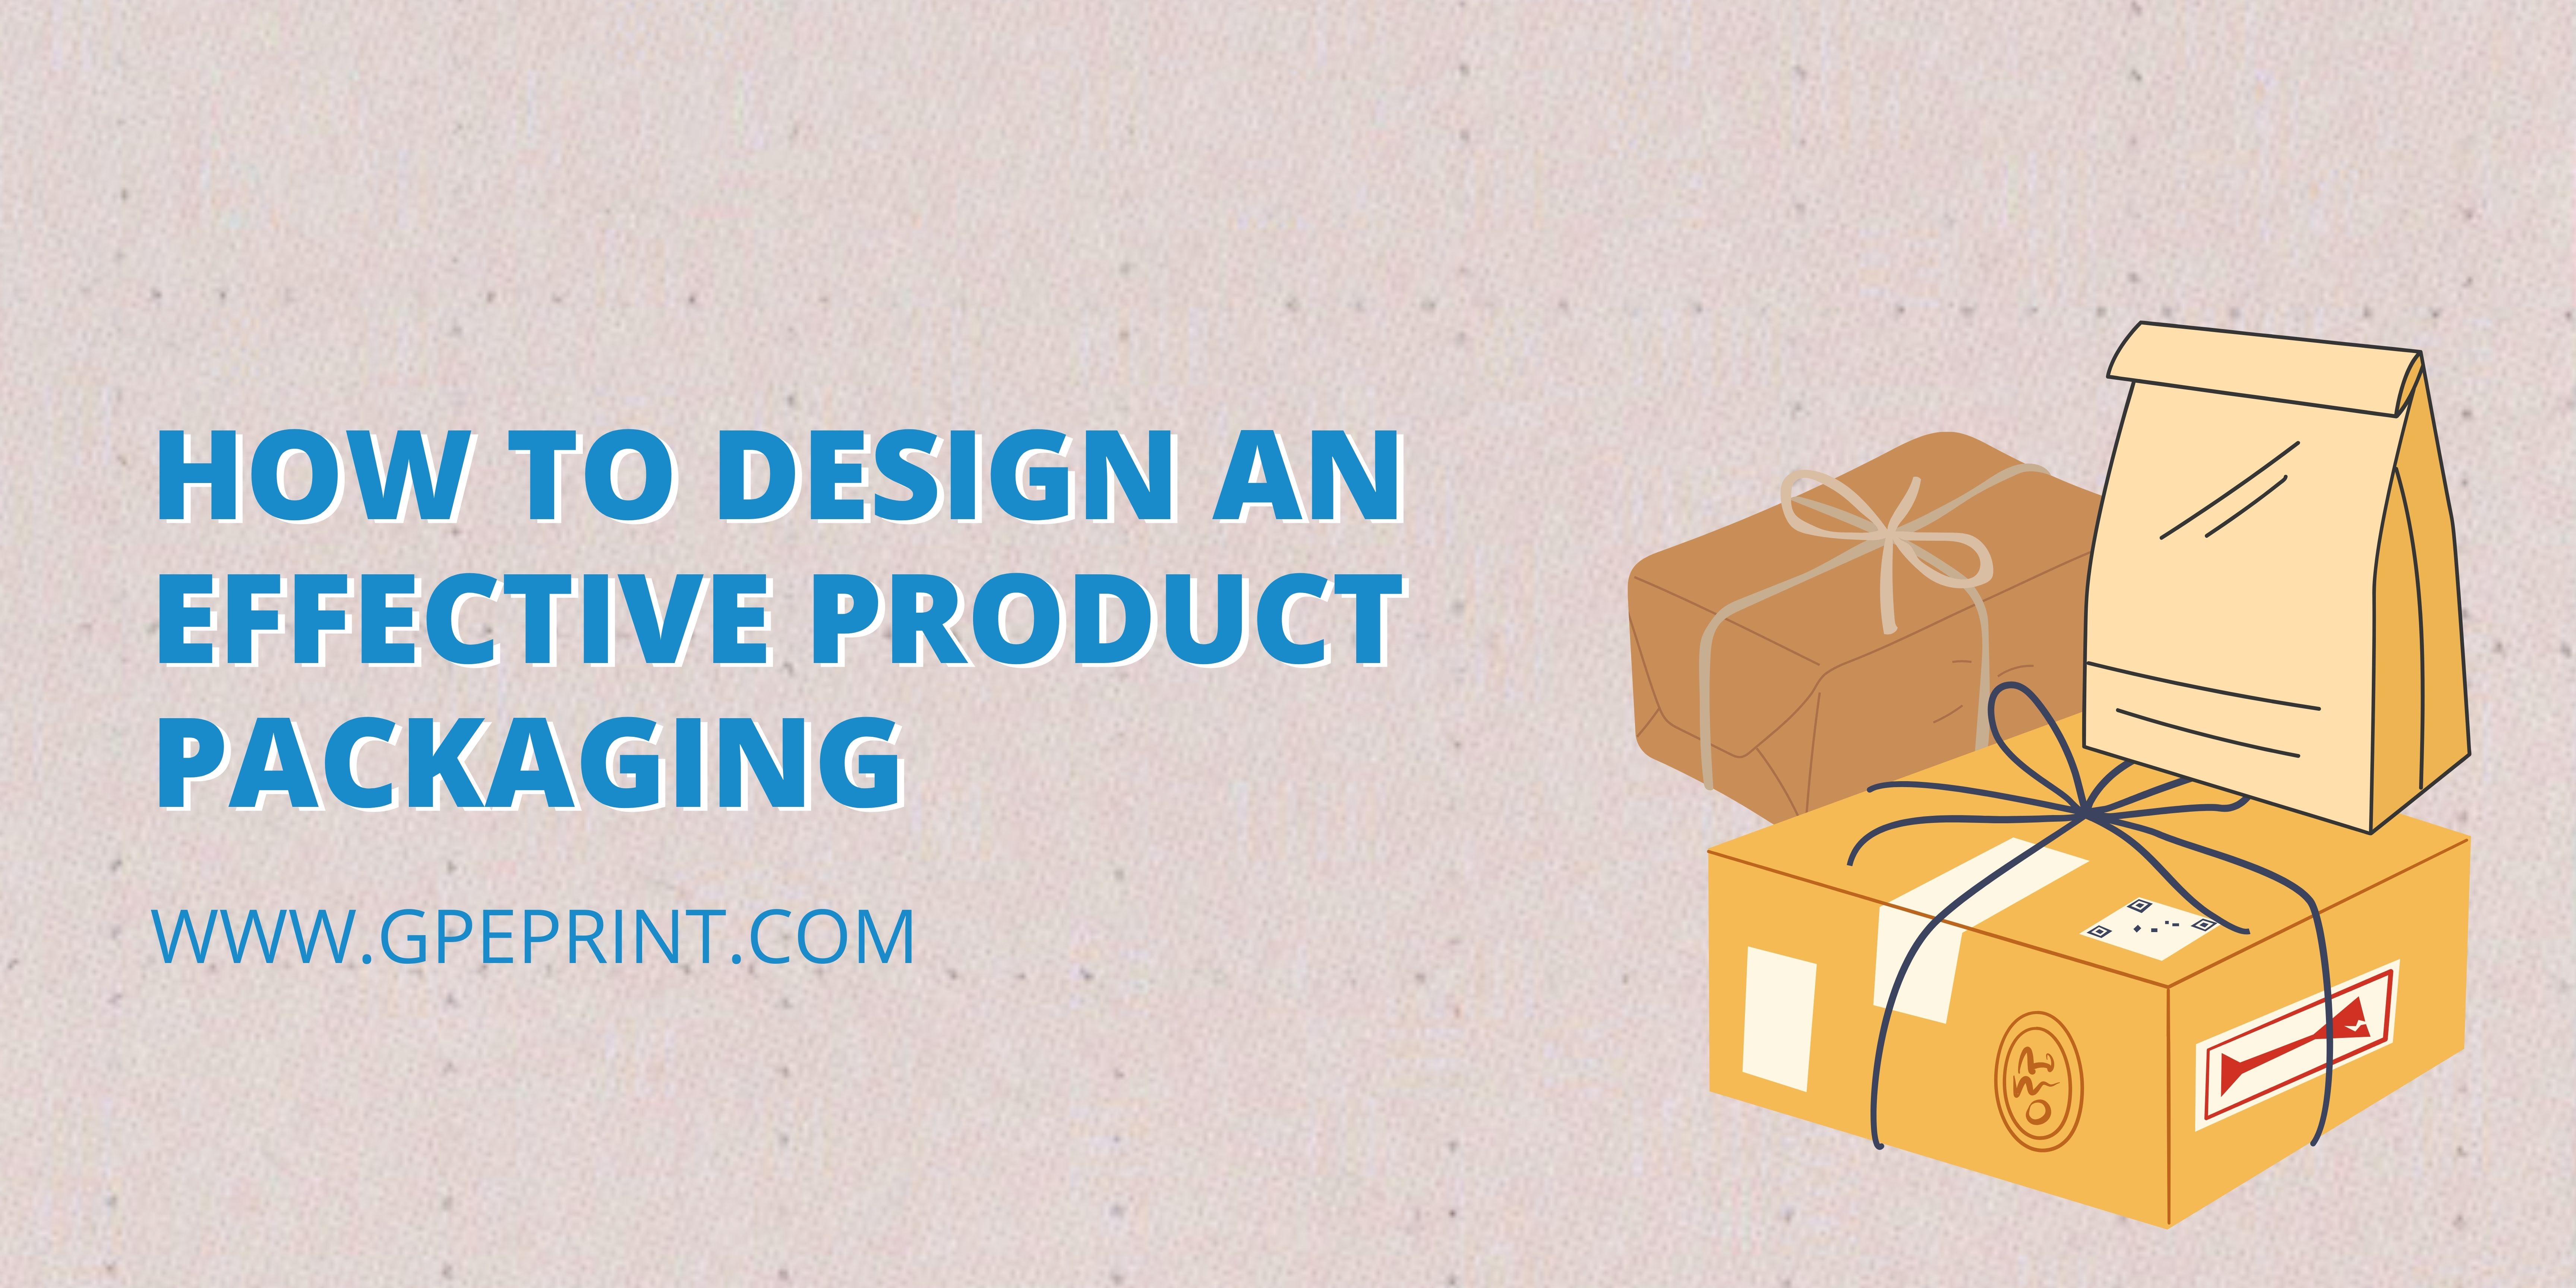 How to Design an Effective Product Packaging